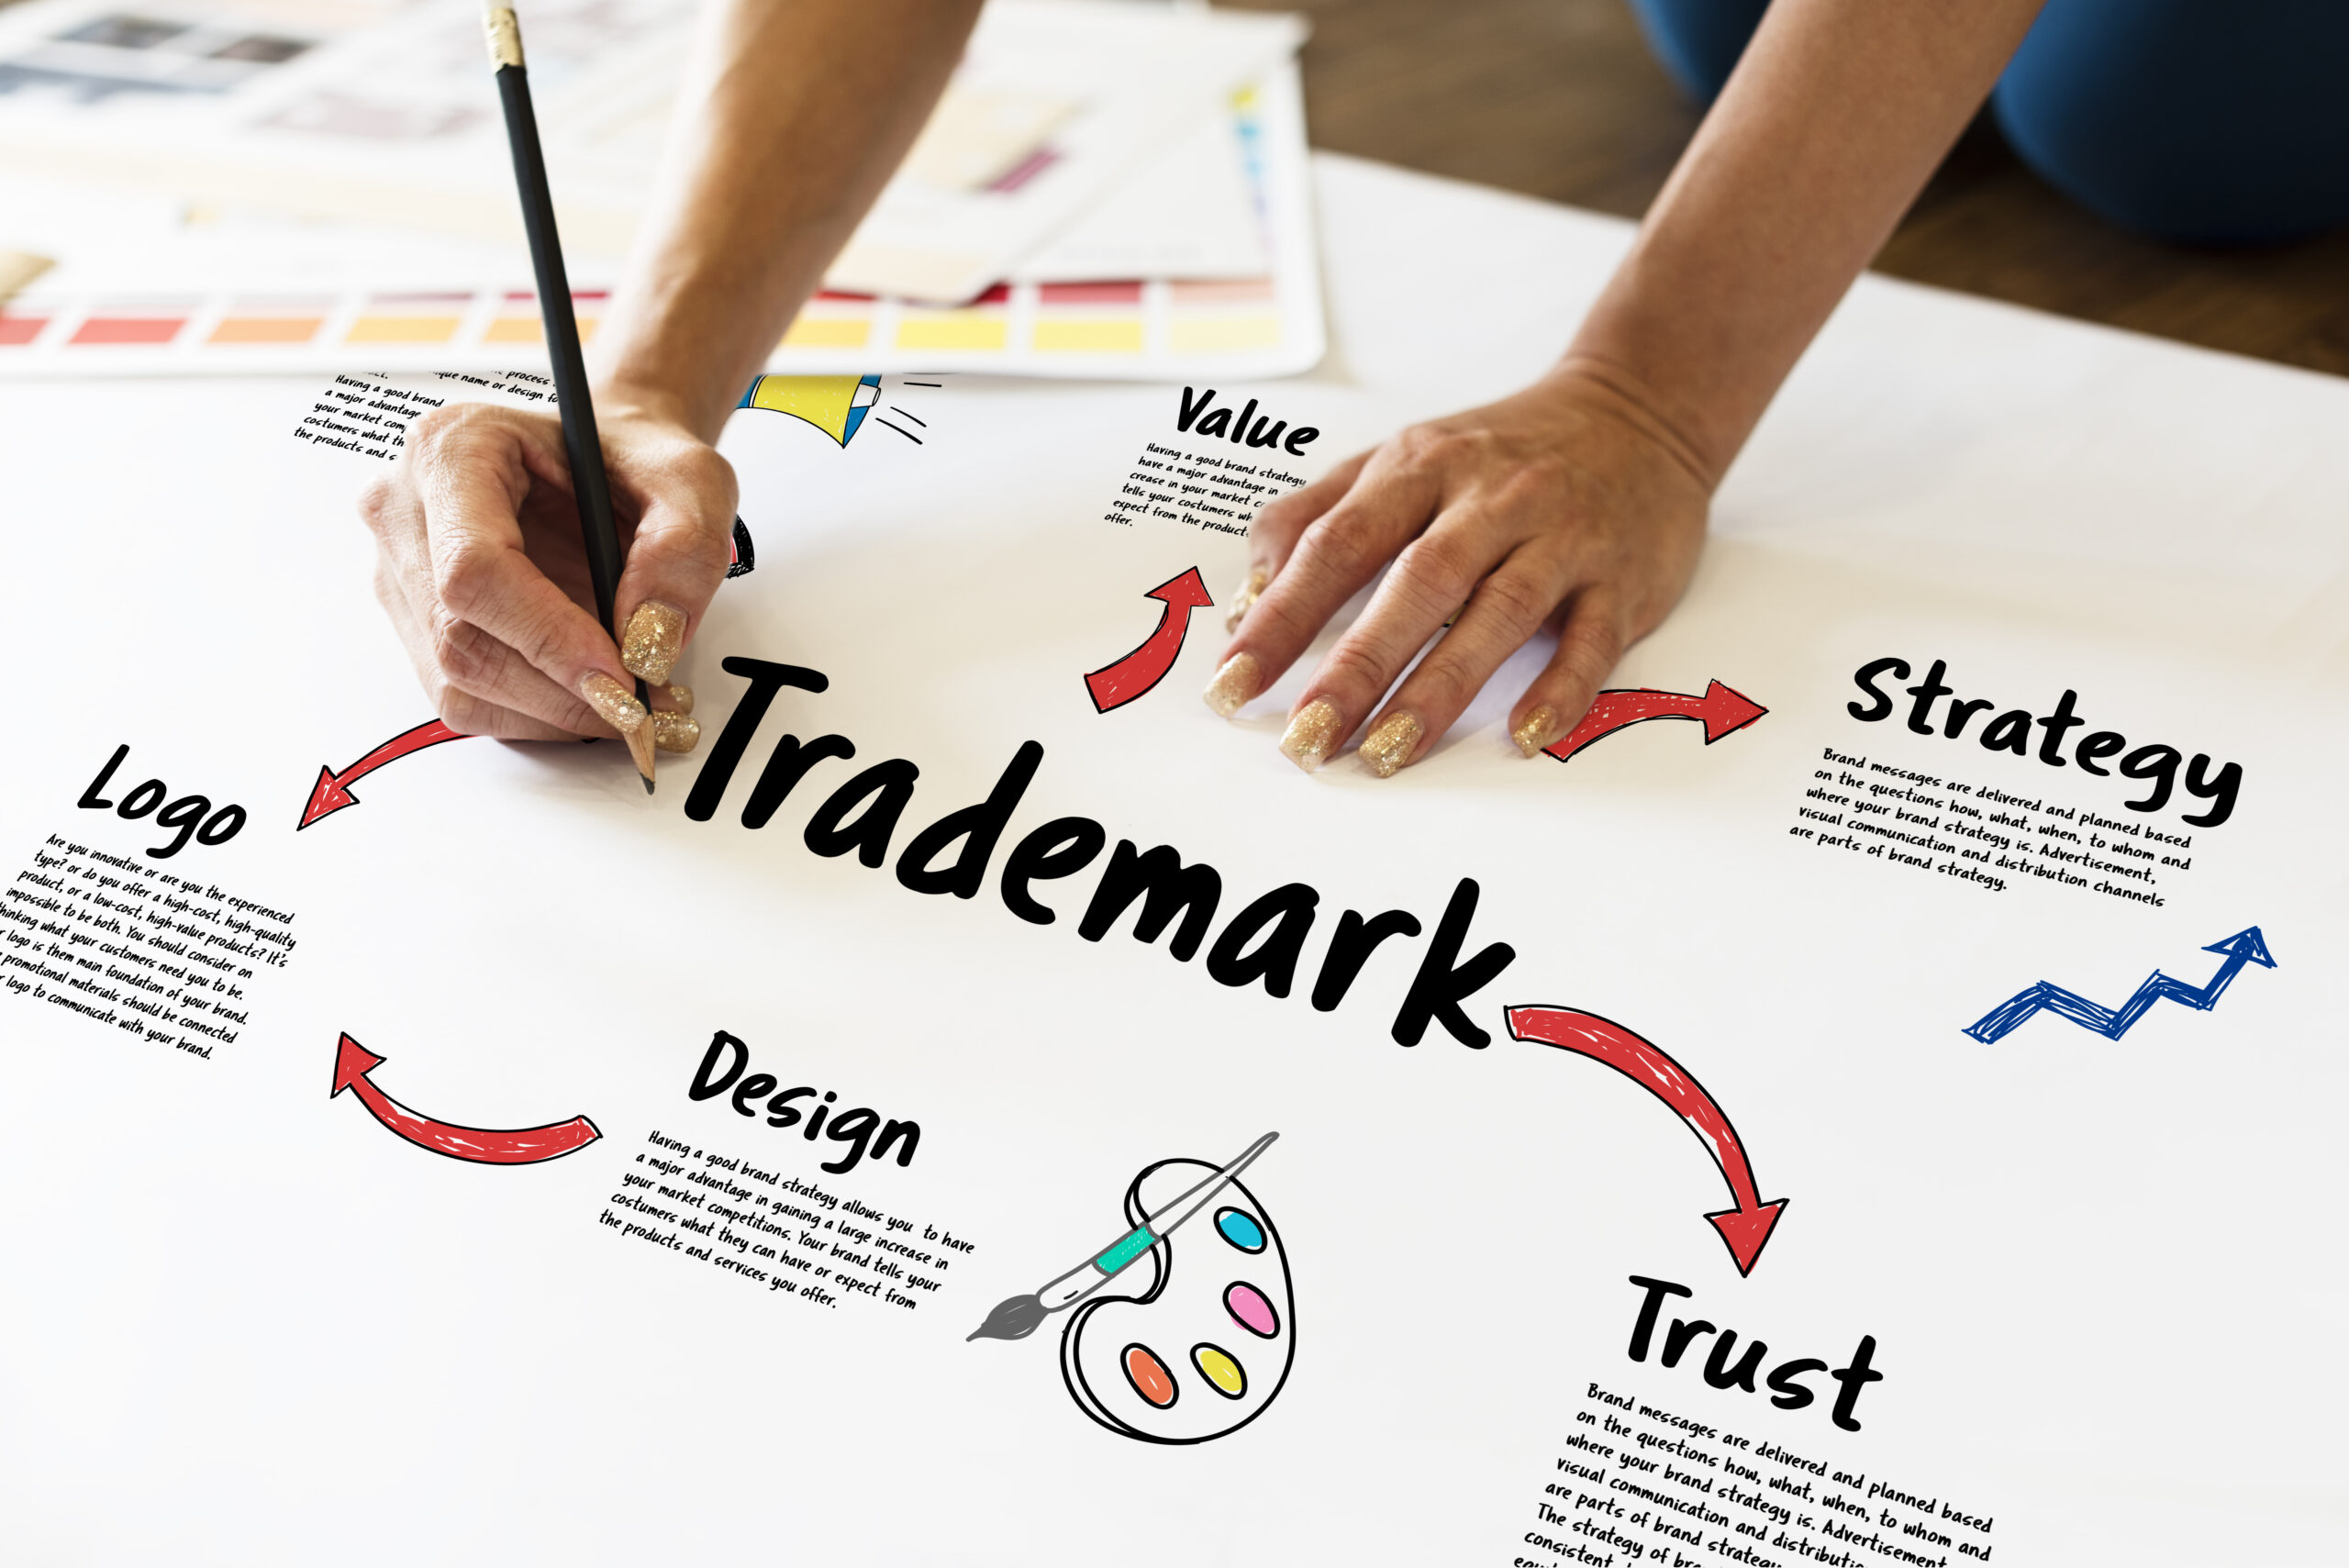 trade mark assignment practical law